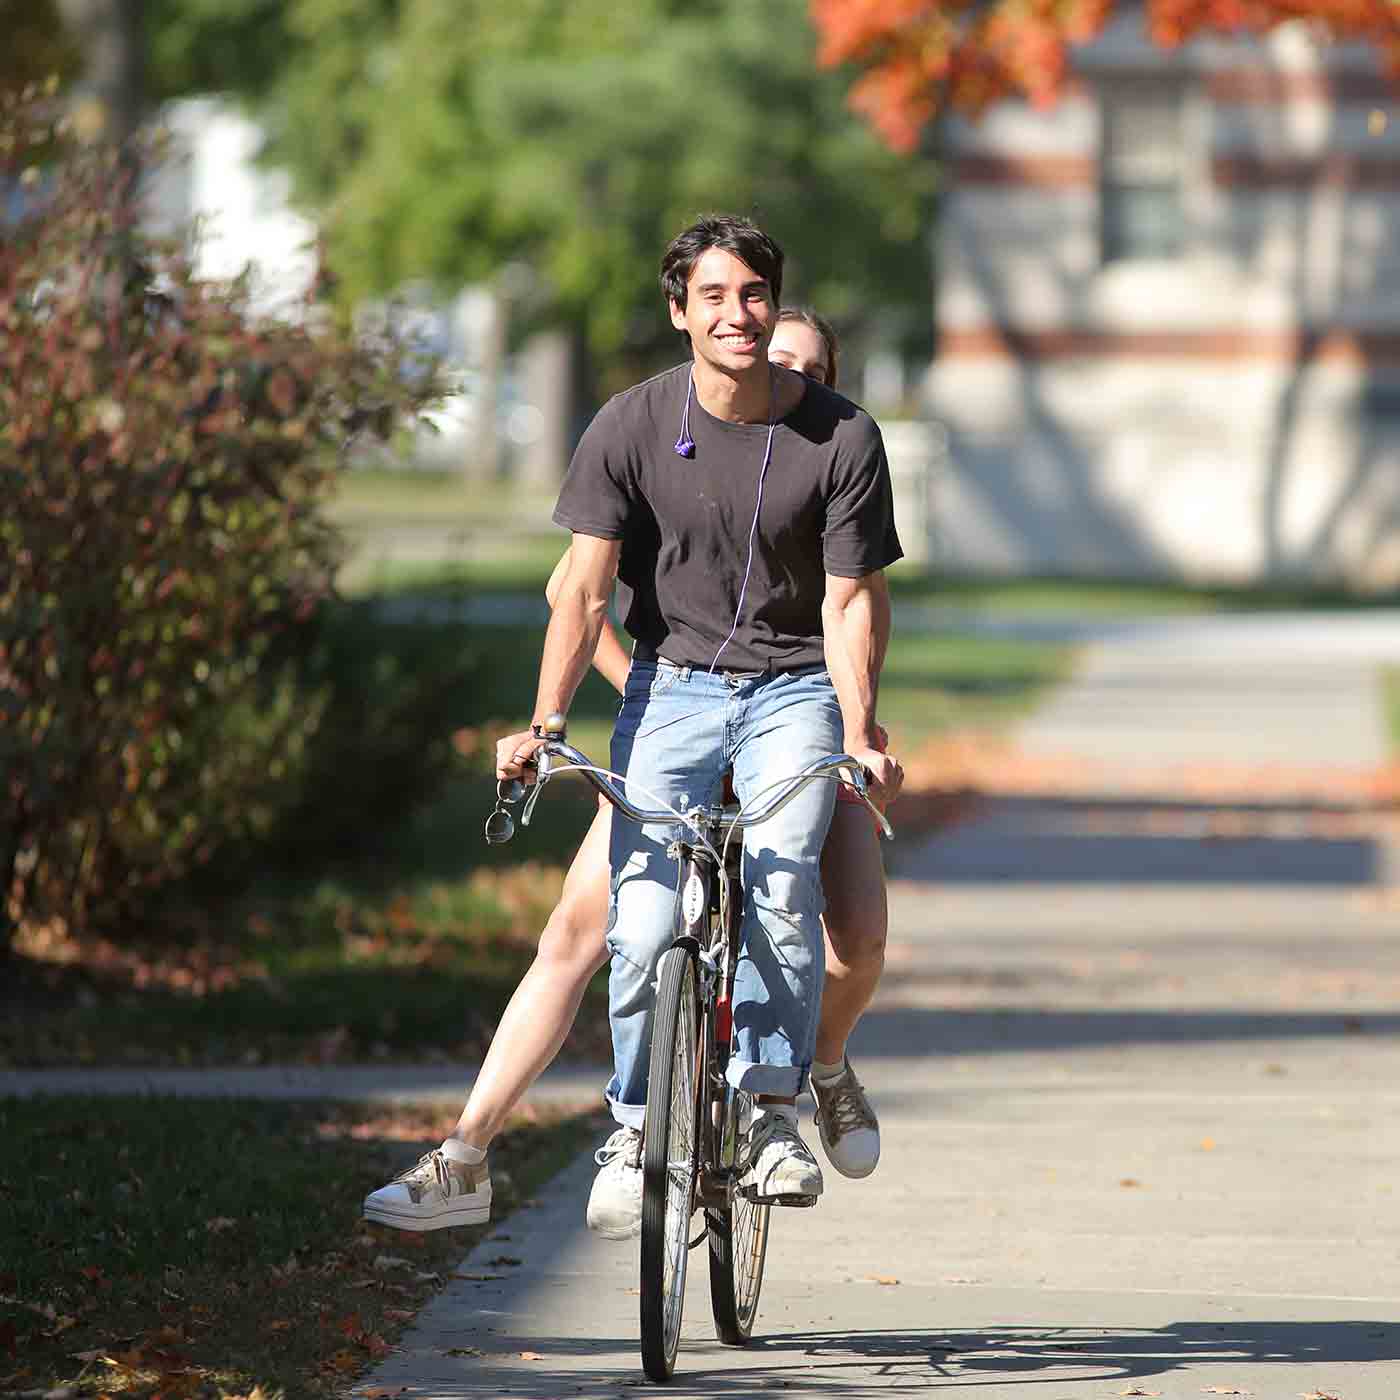 Two students share a bike on one of the campus paths